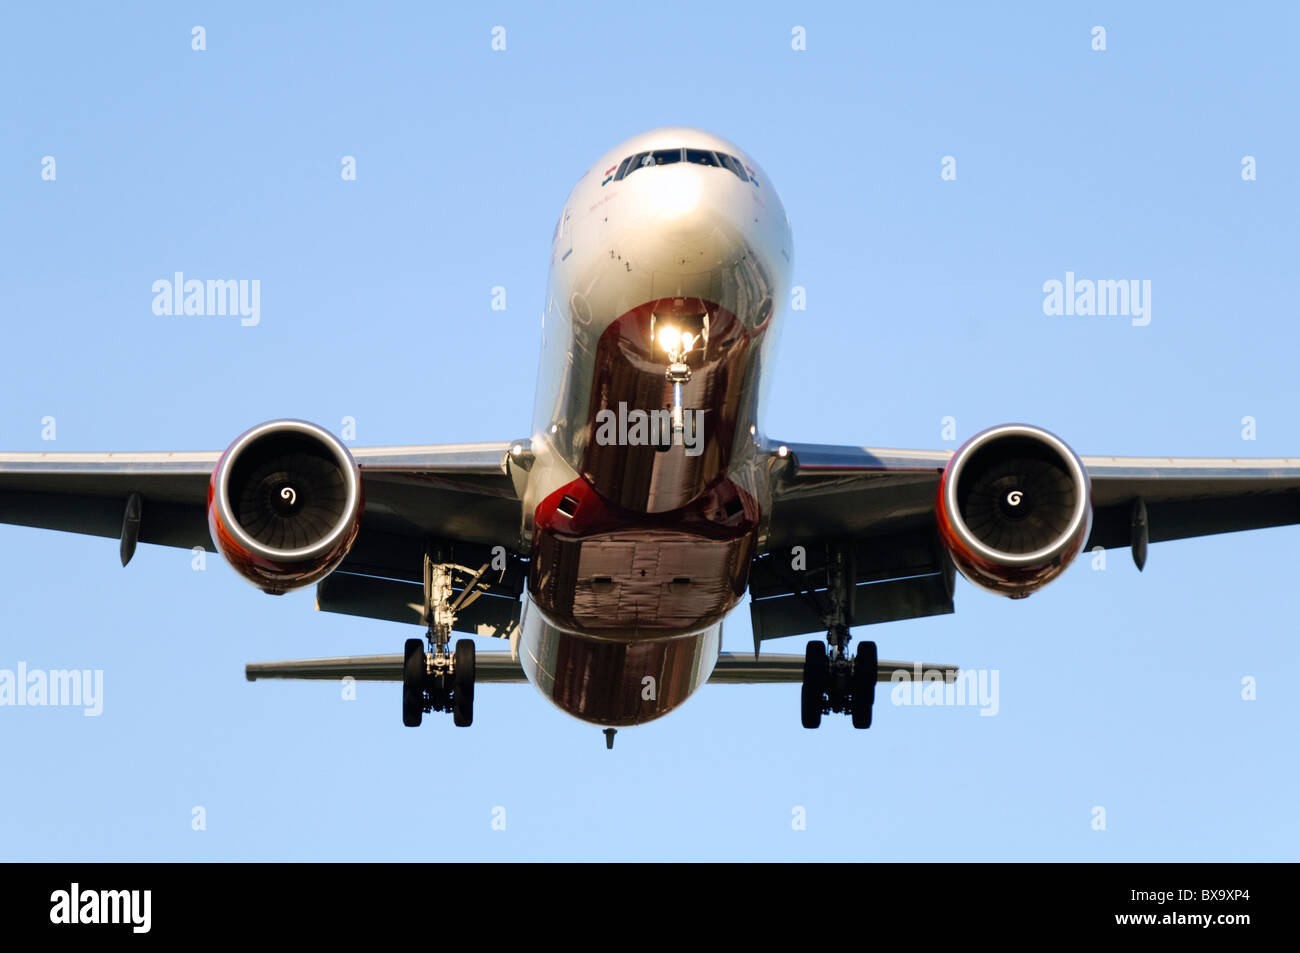 Boeing 777 operated by Air India on final approach for landing at London Heathrow Airport Stock Photo